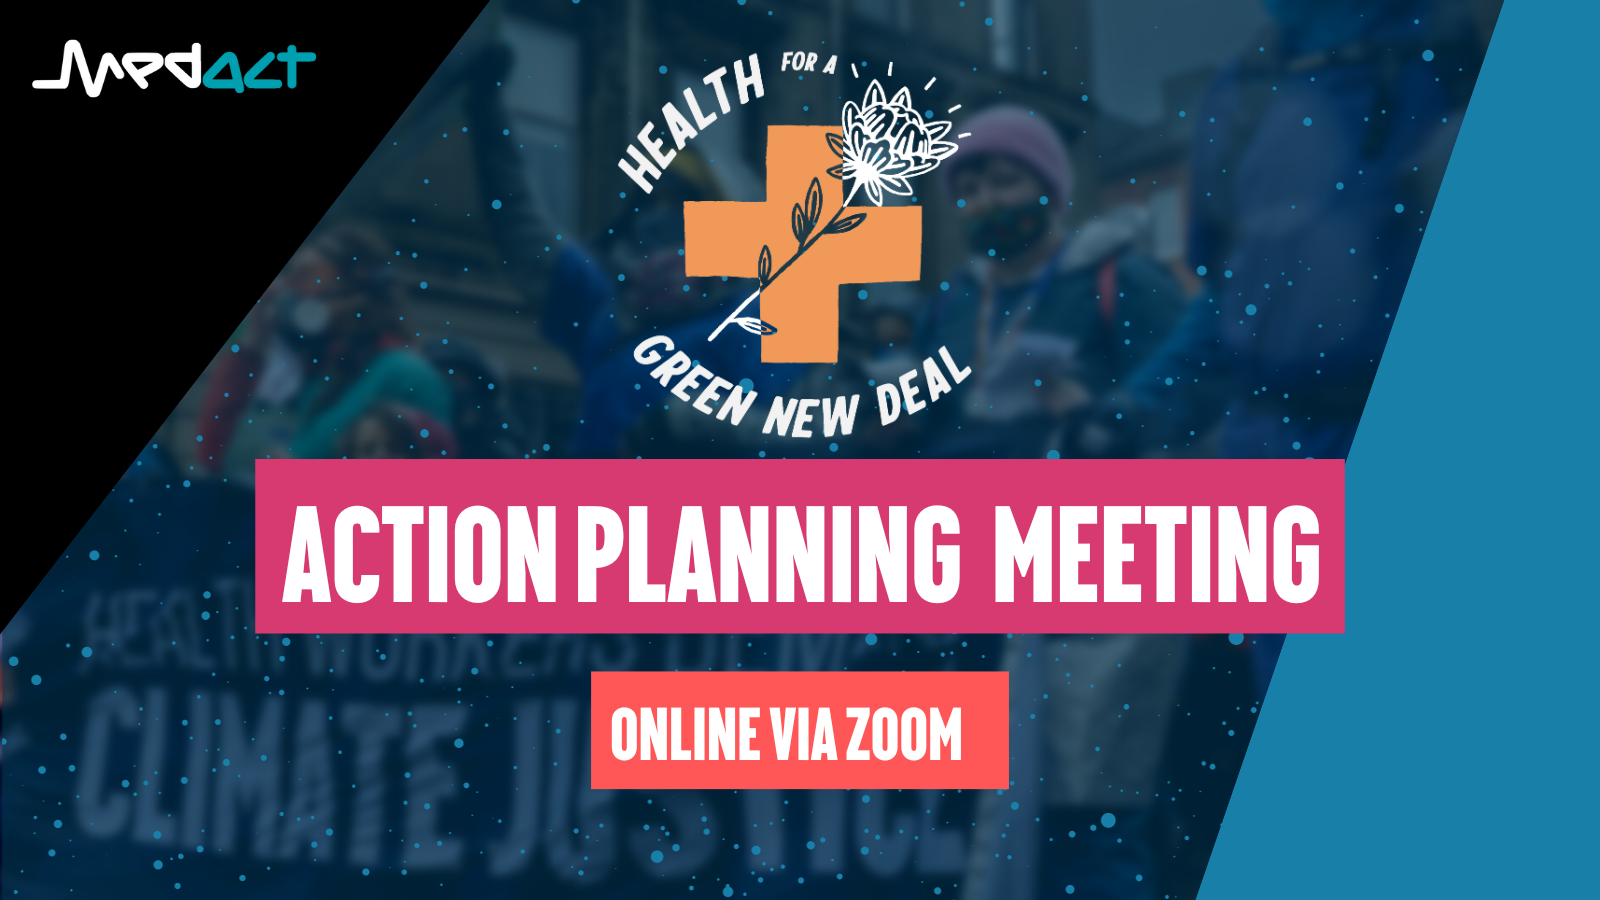 Health for a Green New Deal: Action Planning Meeting